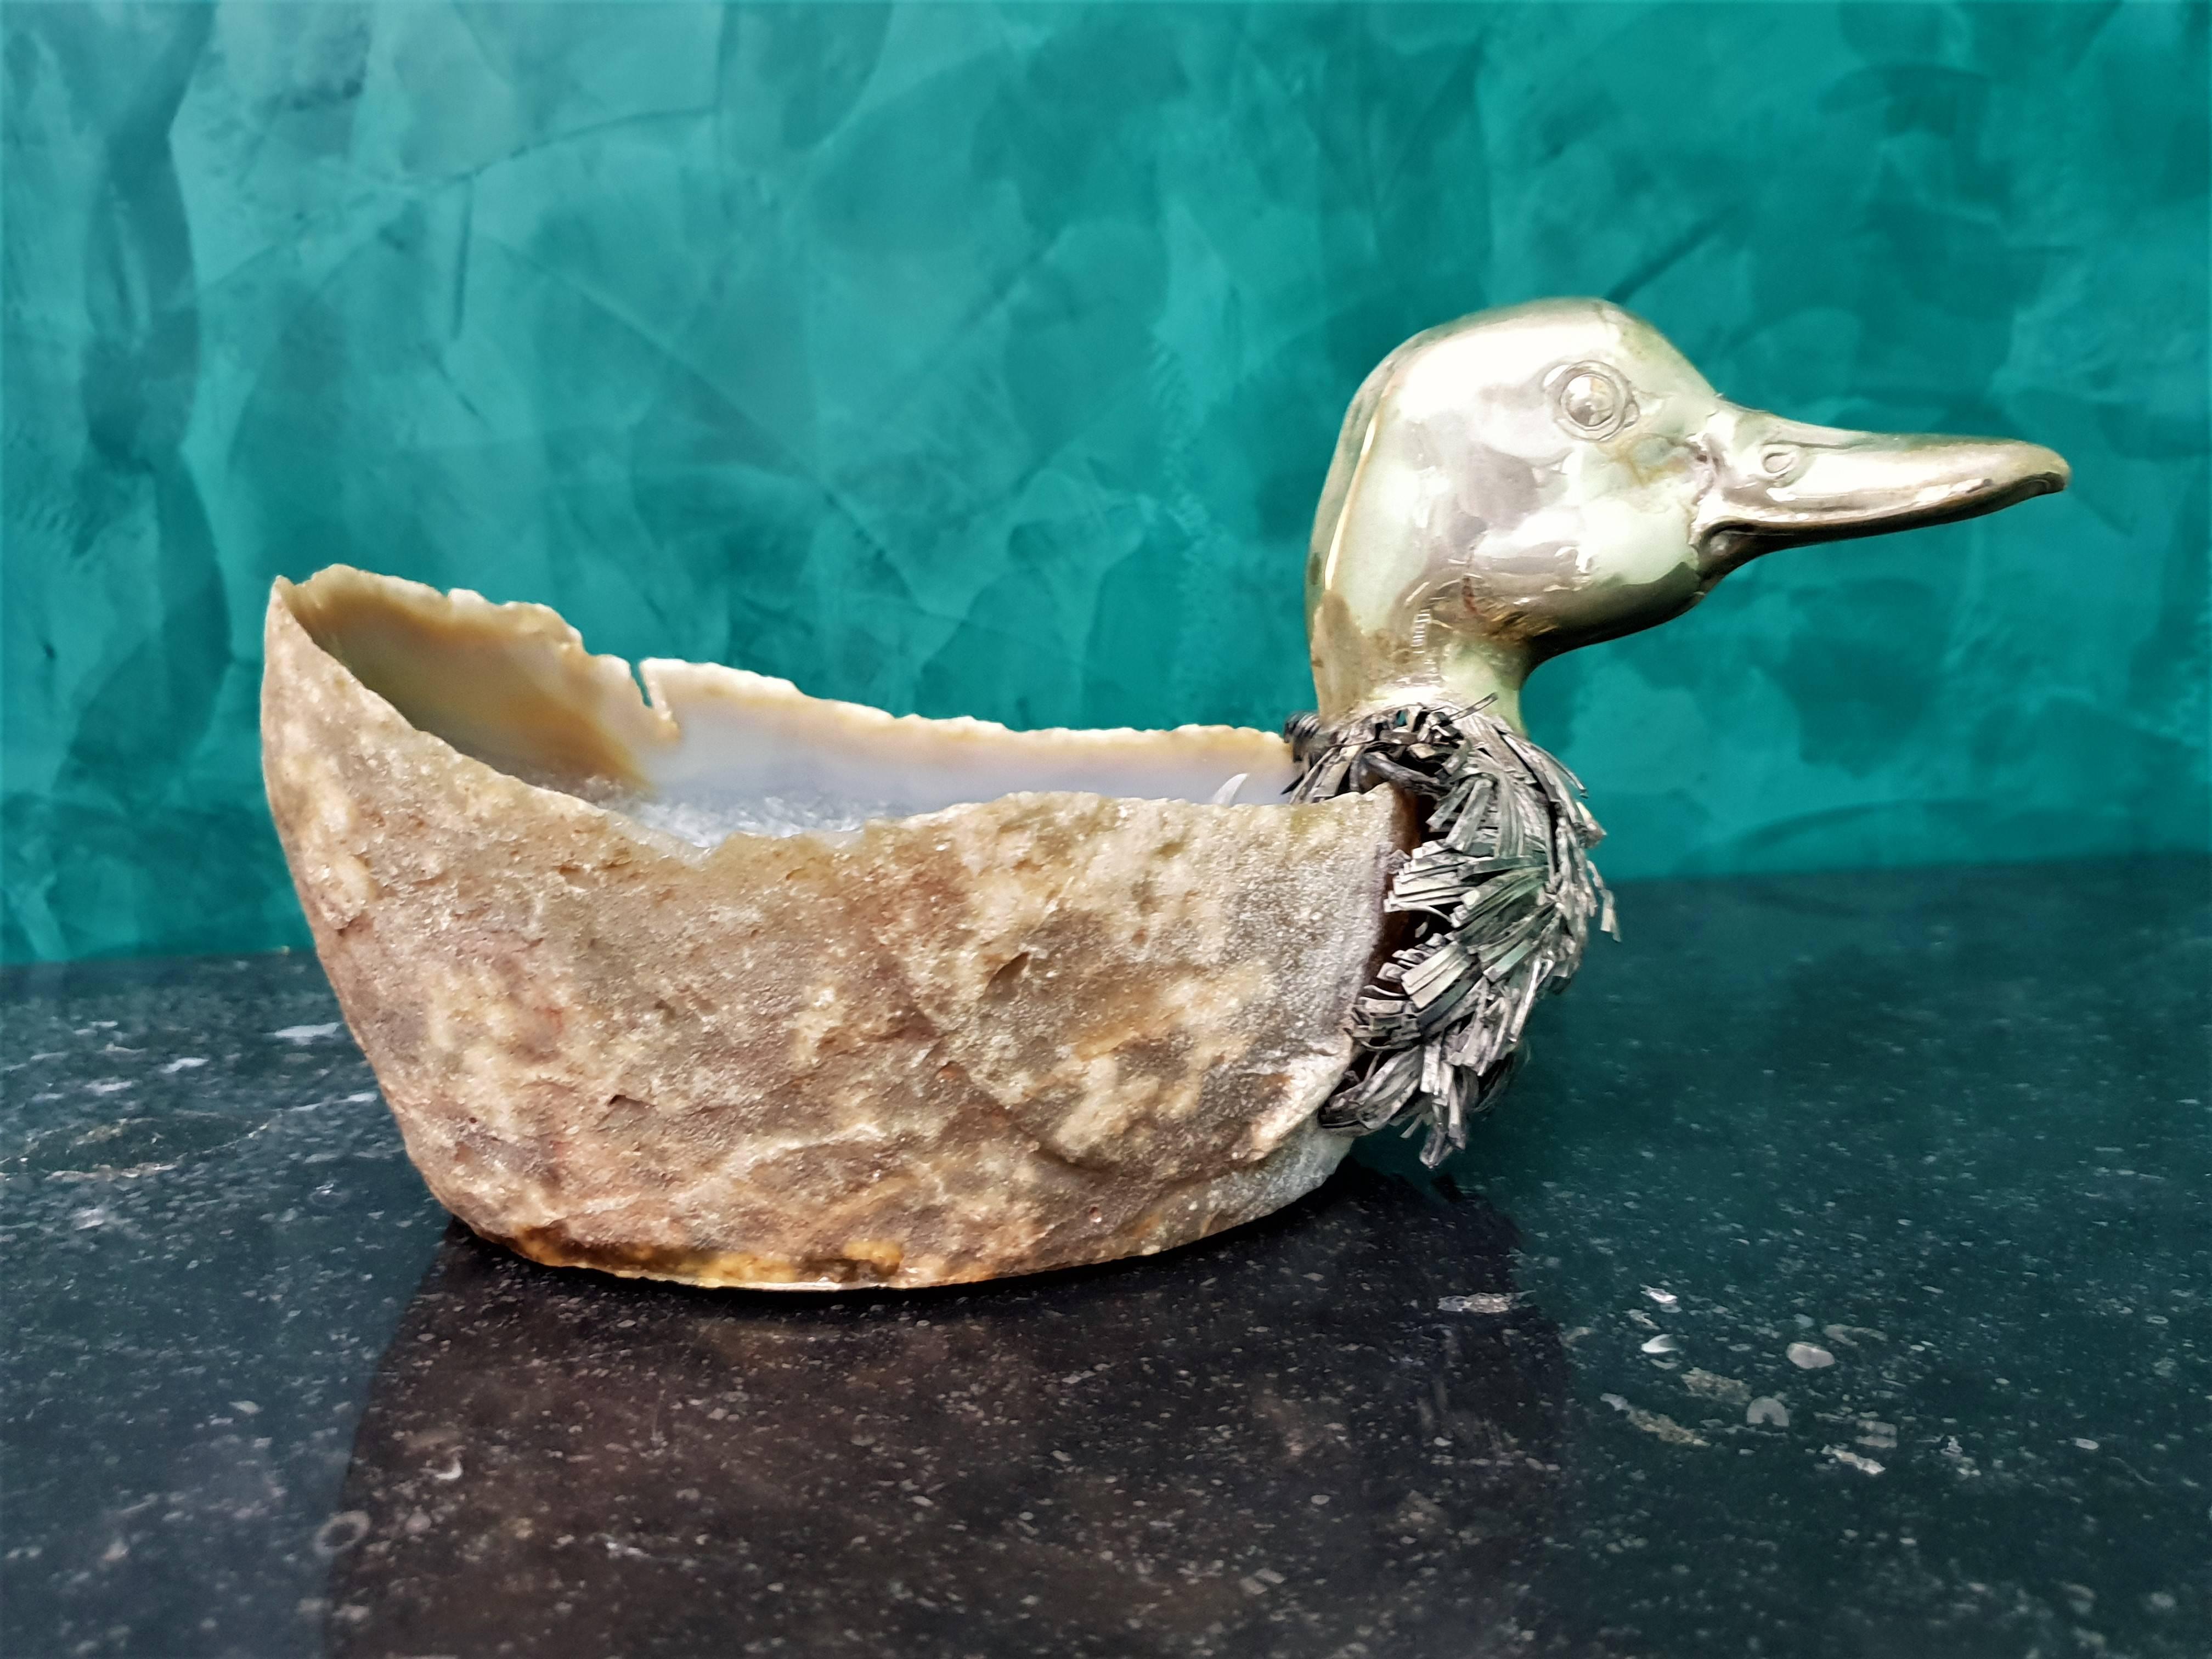 Alabaster and silver duck, Italy, circa 1950s.
The head of the duck is in gilded silver and the body is made by a very beautiful piece of polished alabaster.
Measures: Width 27 cm, height 13.5 cm.